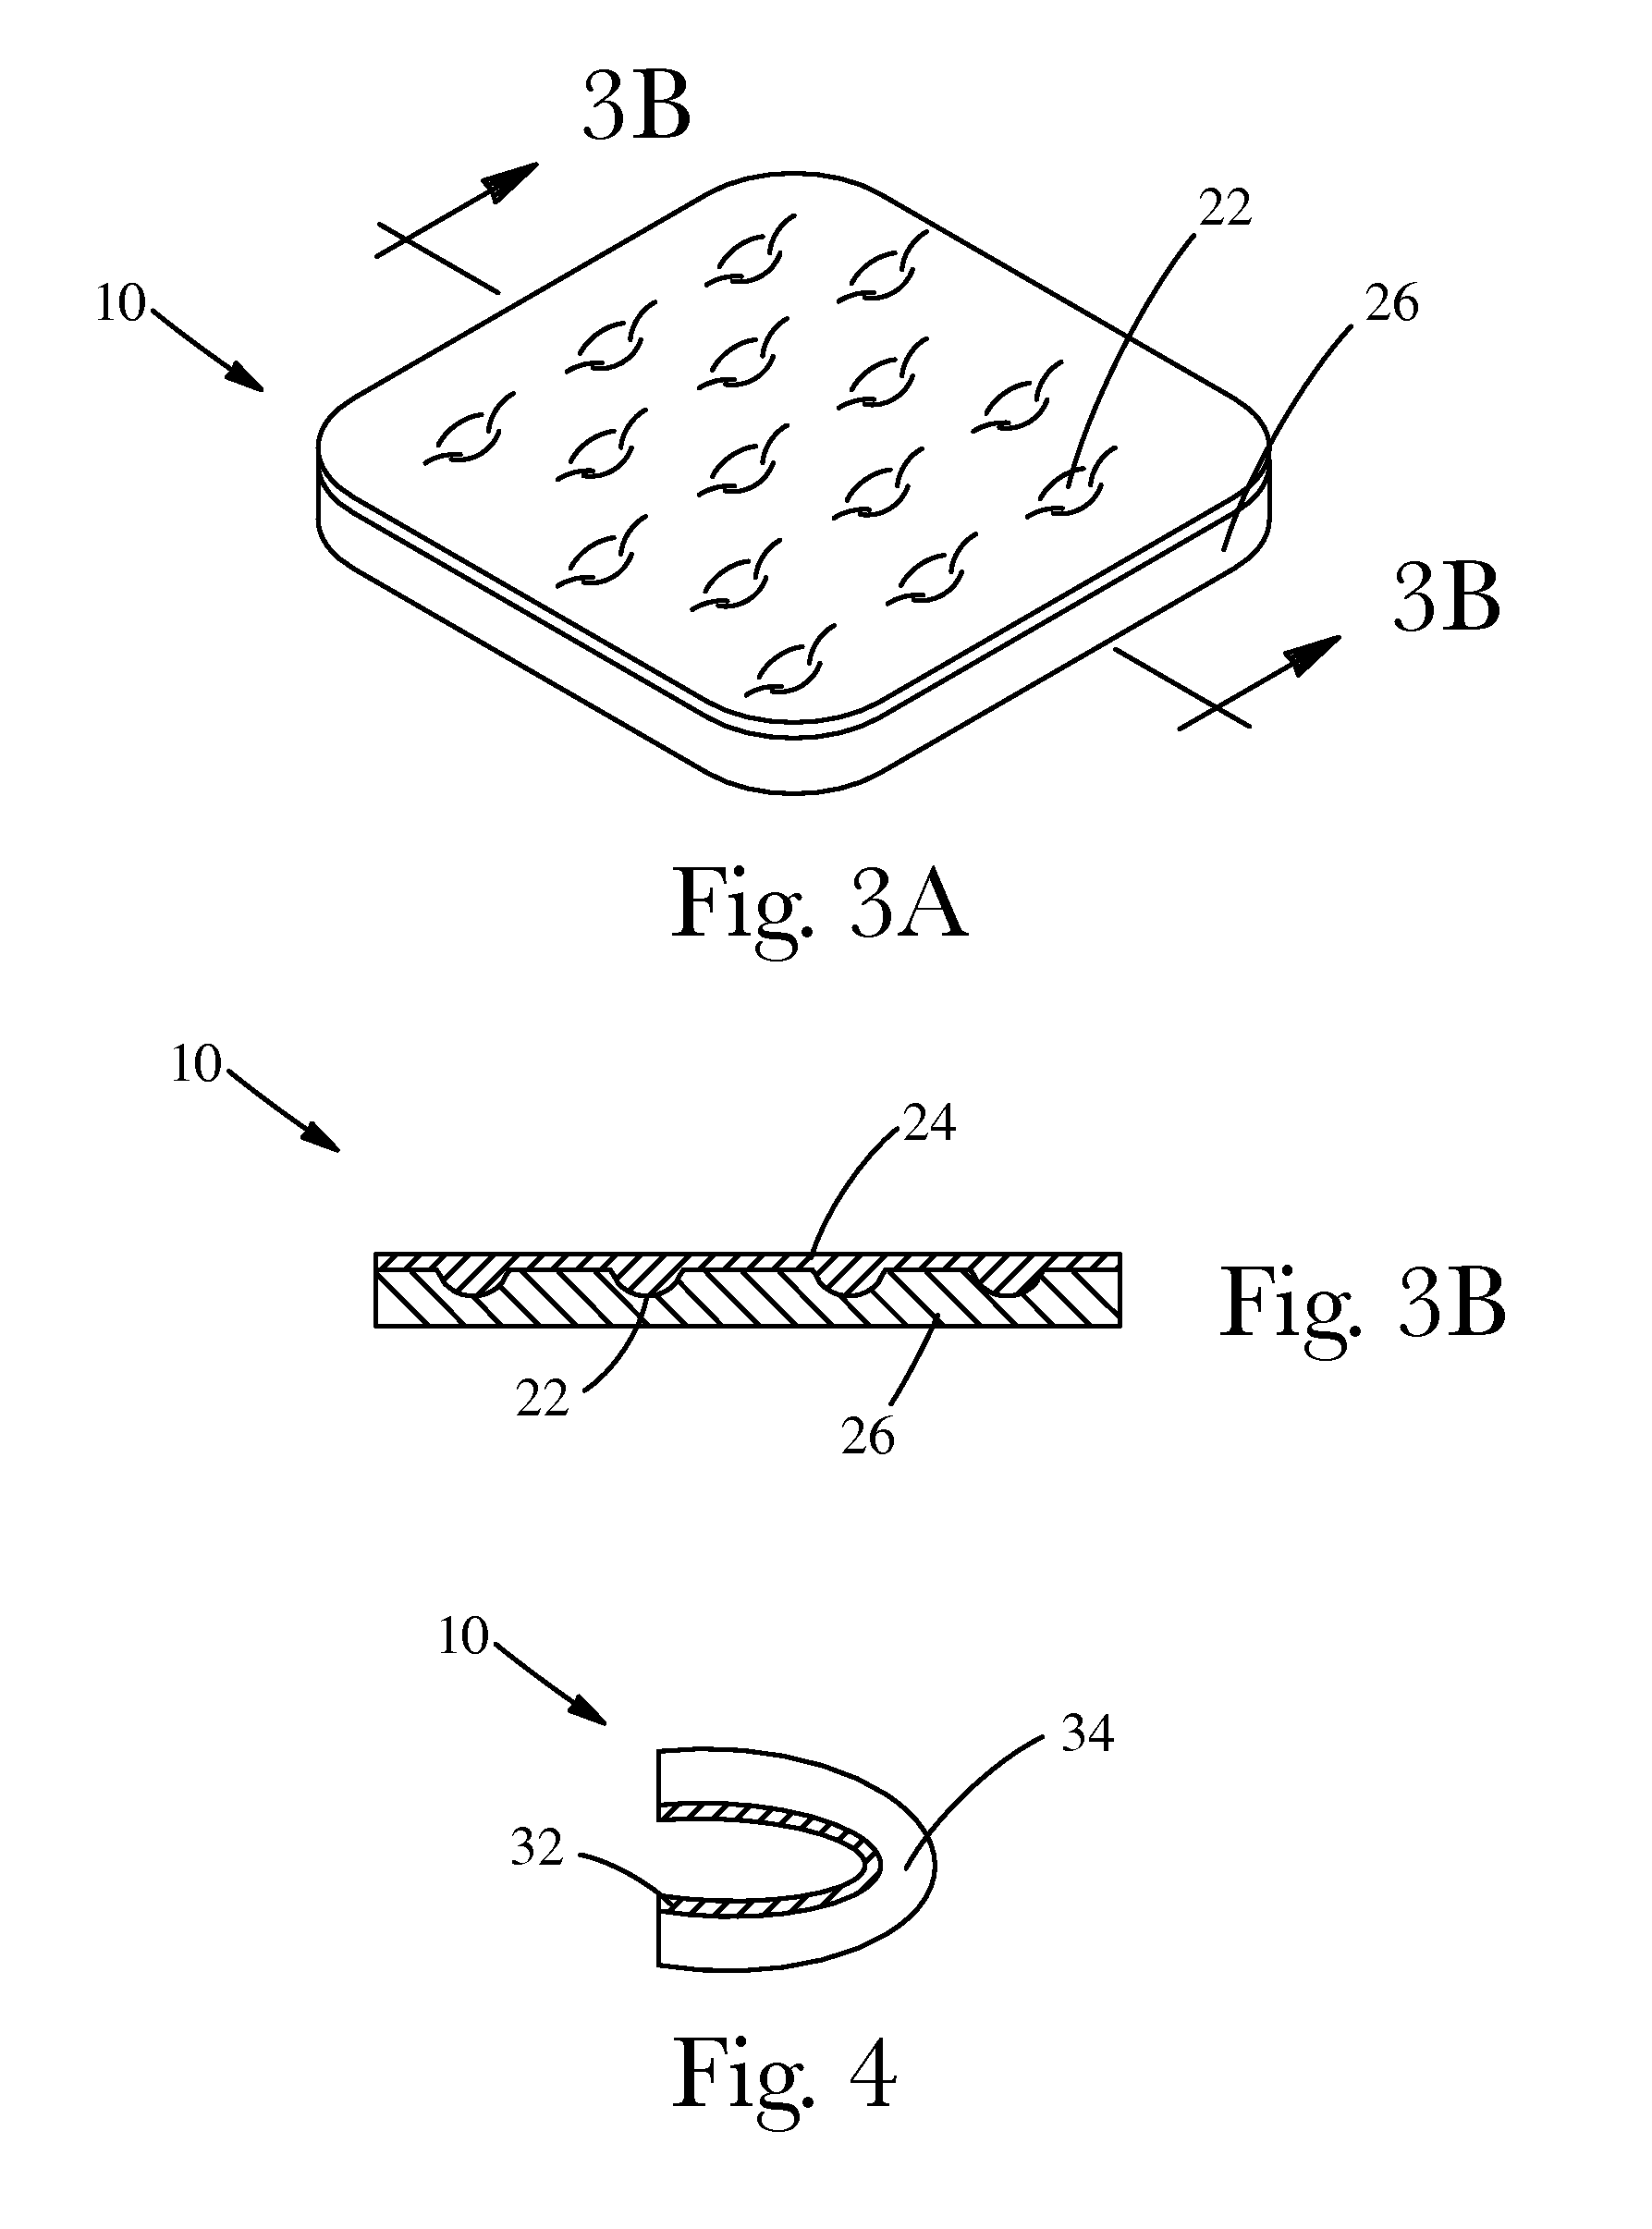 Porous, Dissolvable Solid Substrate and Surface Resident Coating Comprising Water Sensitive Actives